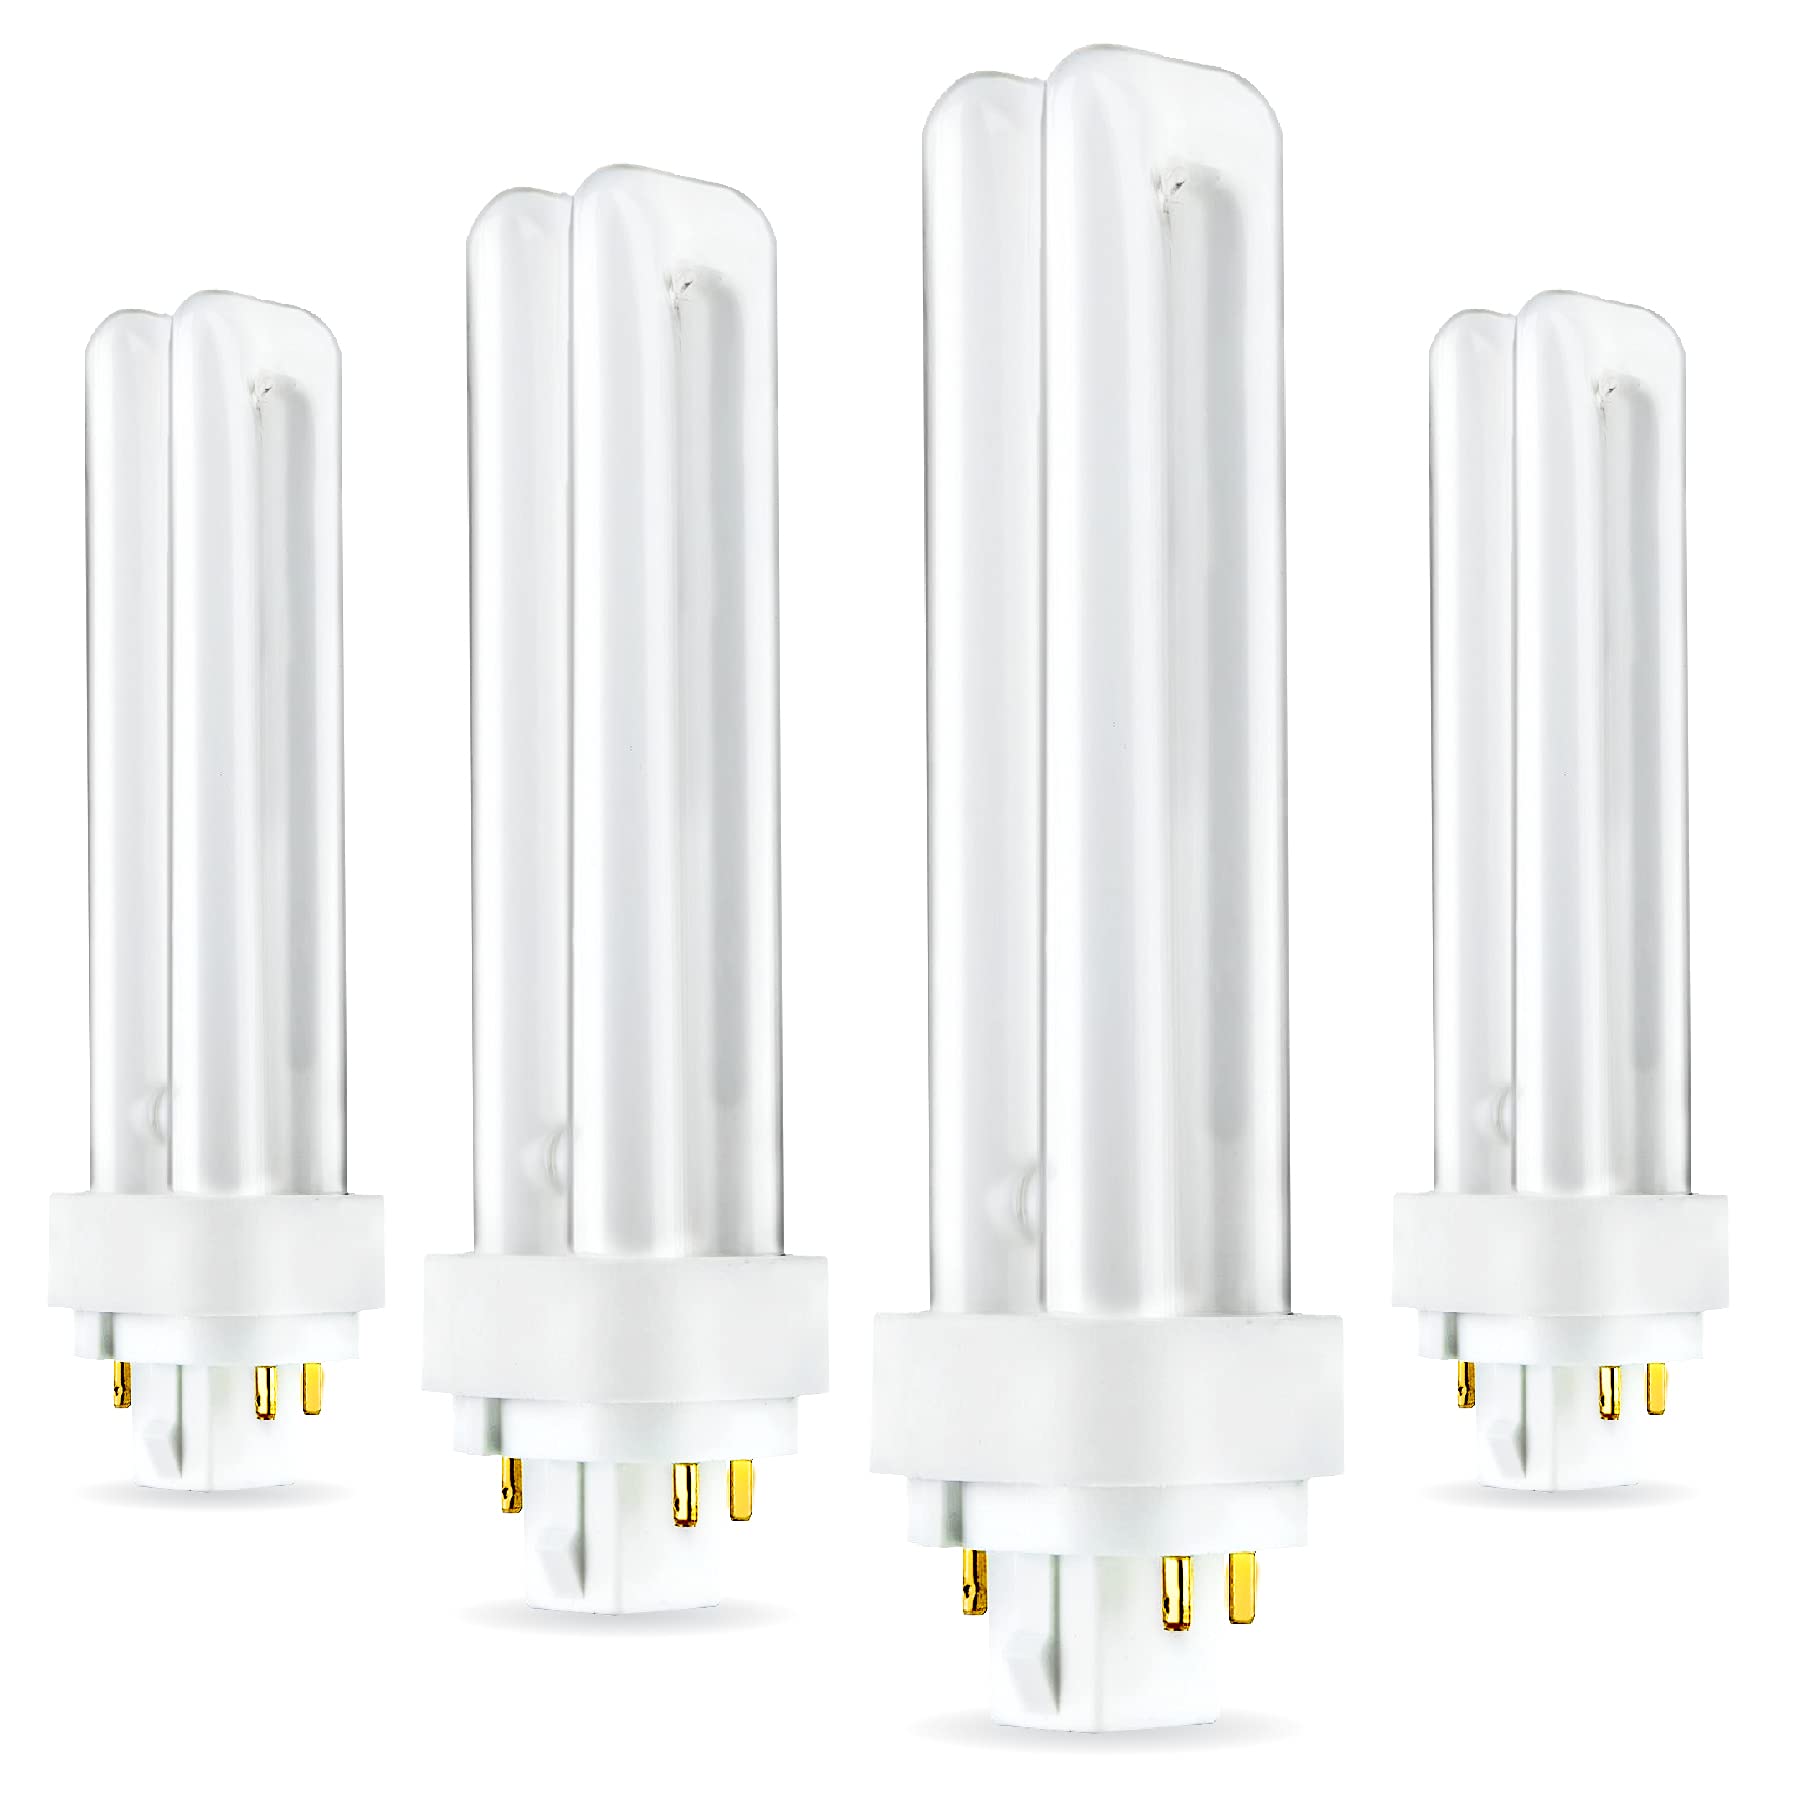 (4 Pack) PLC-13W 835, 4 Pin G24q-1, 13 Watt Double Tube, Compact Fluorescent Light Bulb, Replaces Philips 38327-3, GE 97596 and Sylvania 20671  - Very Good